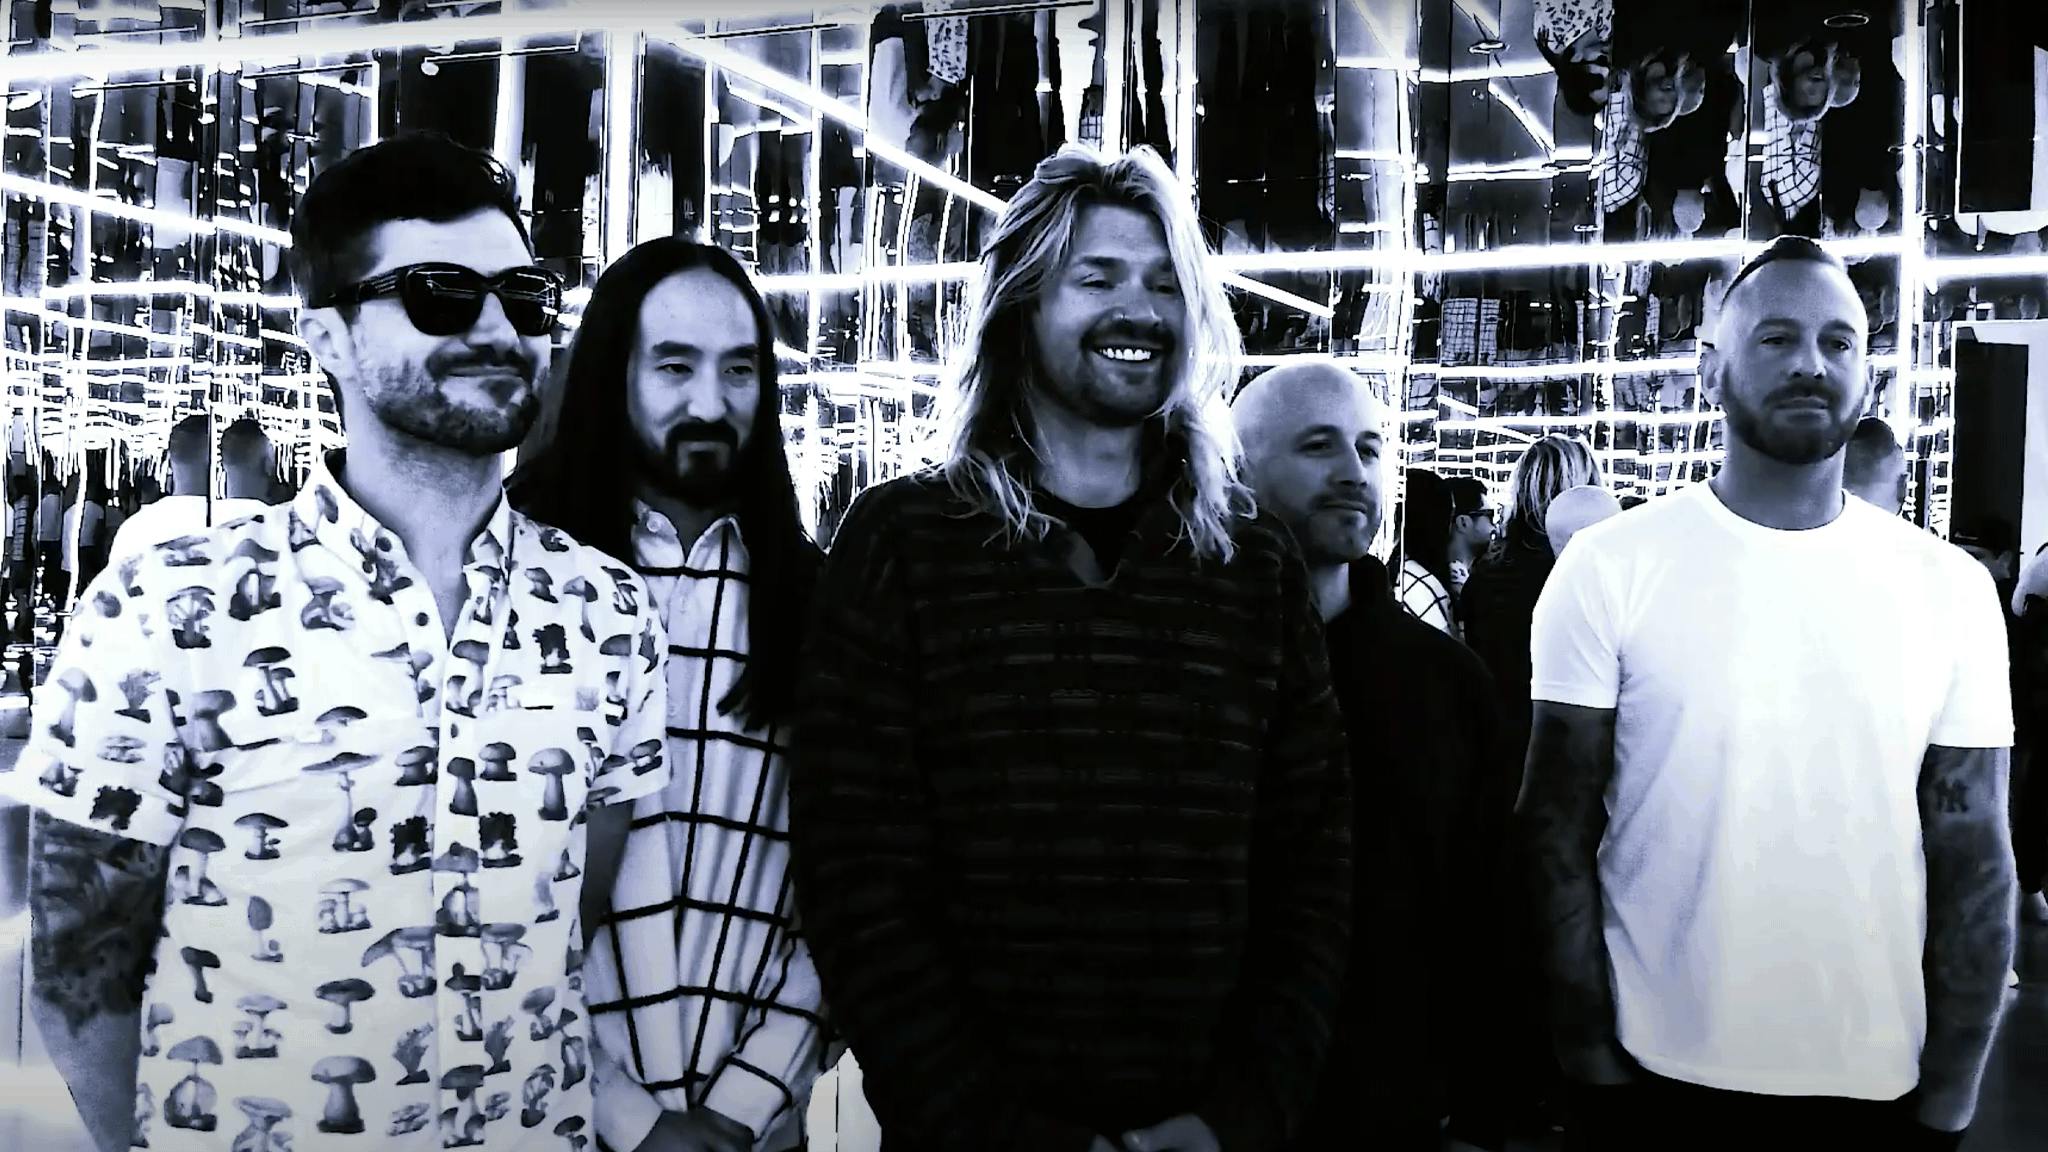 Hear Steve Aoki’s wild remix of Cute Without The ‘E’ by Taking Back Sunday